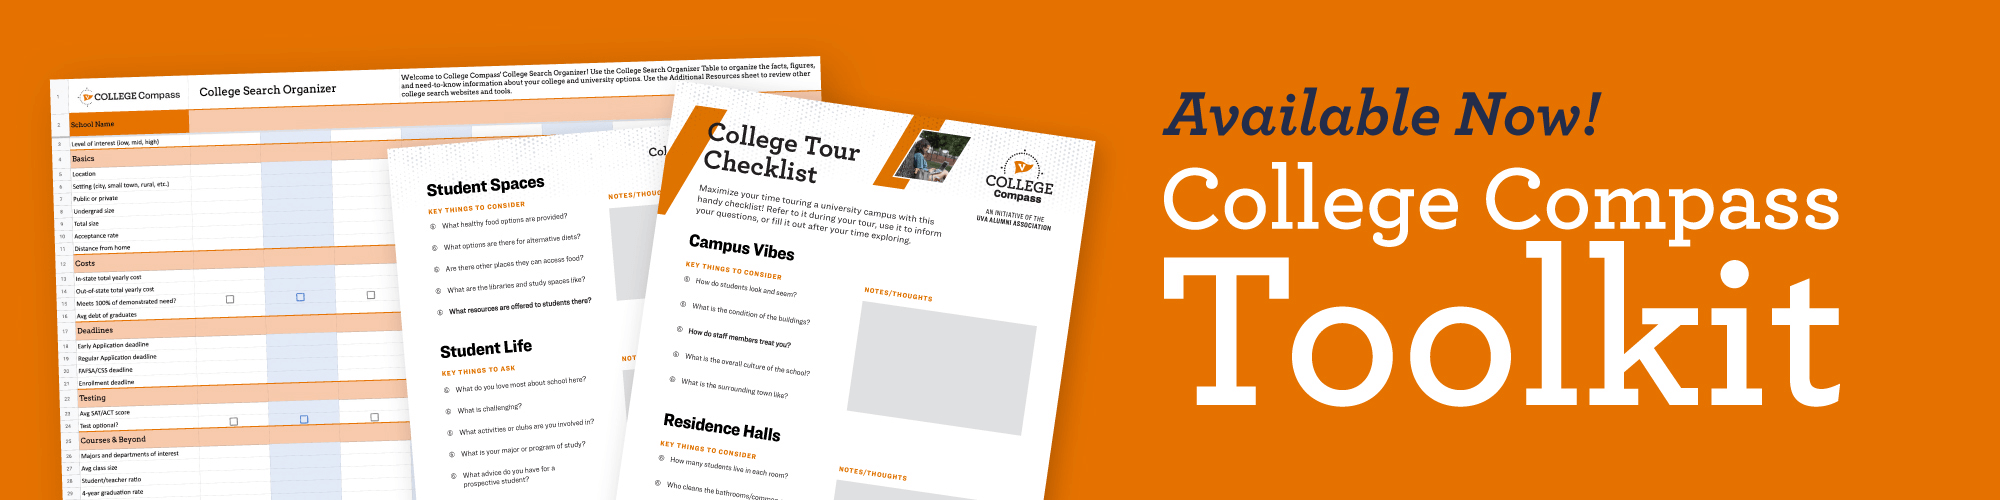 Check out College Compass Toolkit!